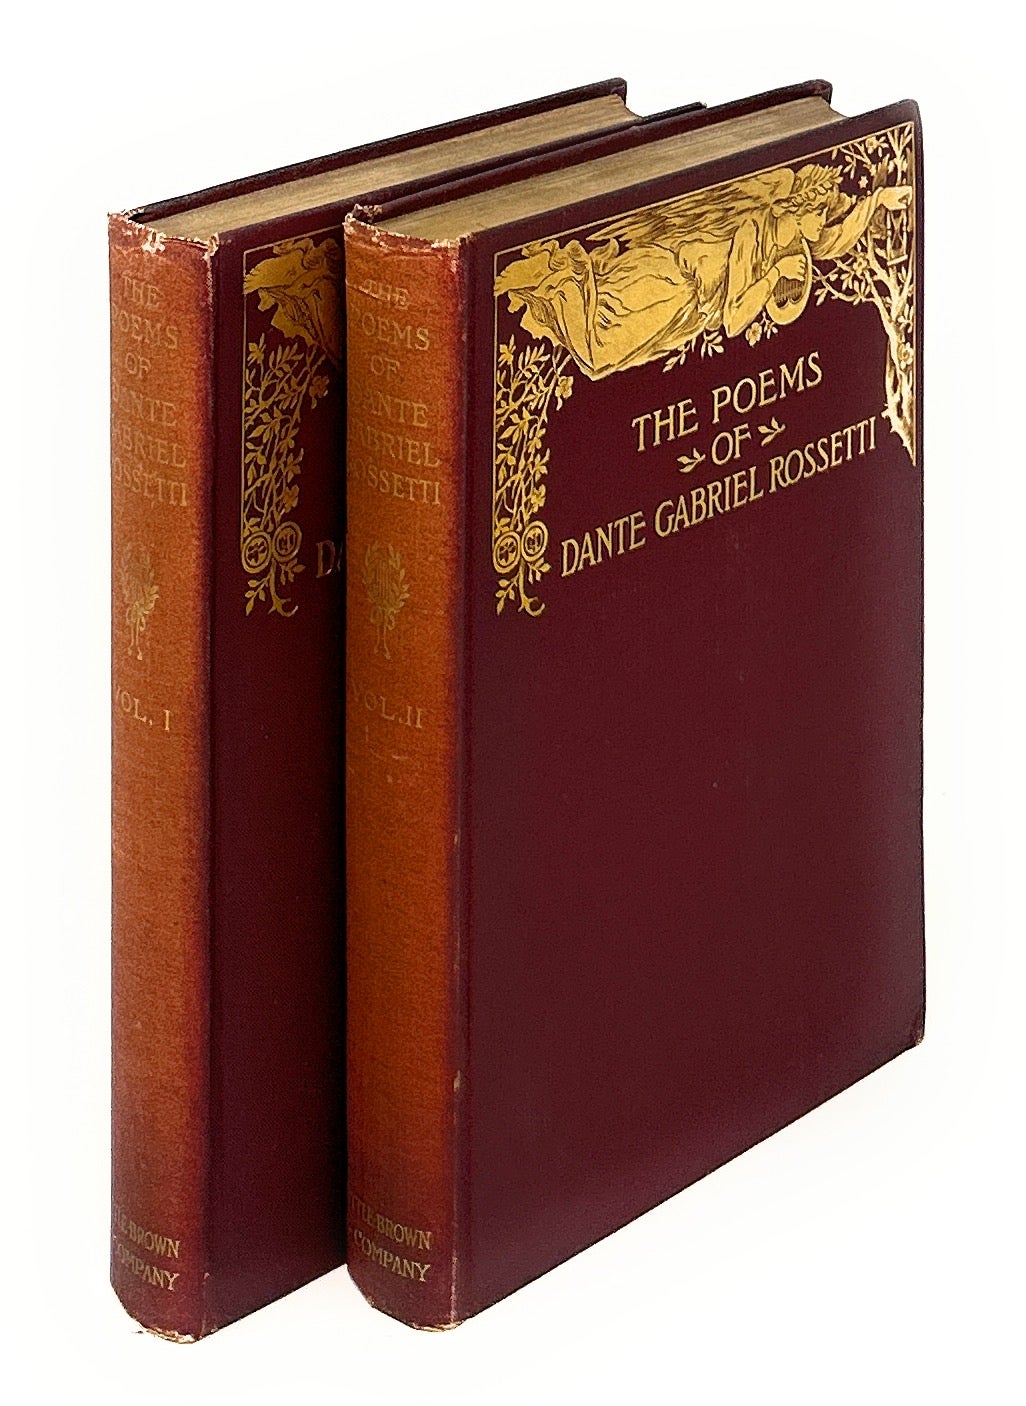 The Poetical Works of Dante Gabriel Rossetti, Complete in Two Volumes 2  Volume Set, Poems by Dante Gabriel Rossetti, William M. Rossetti, Preface  on 